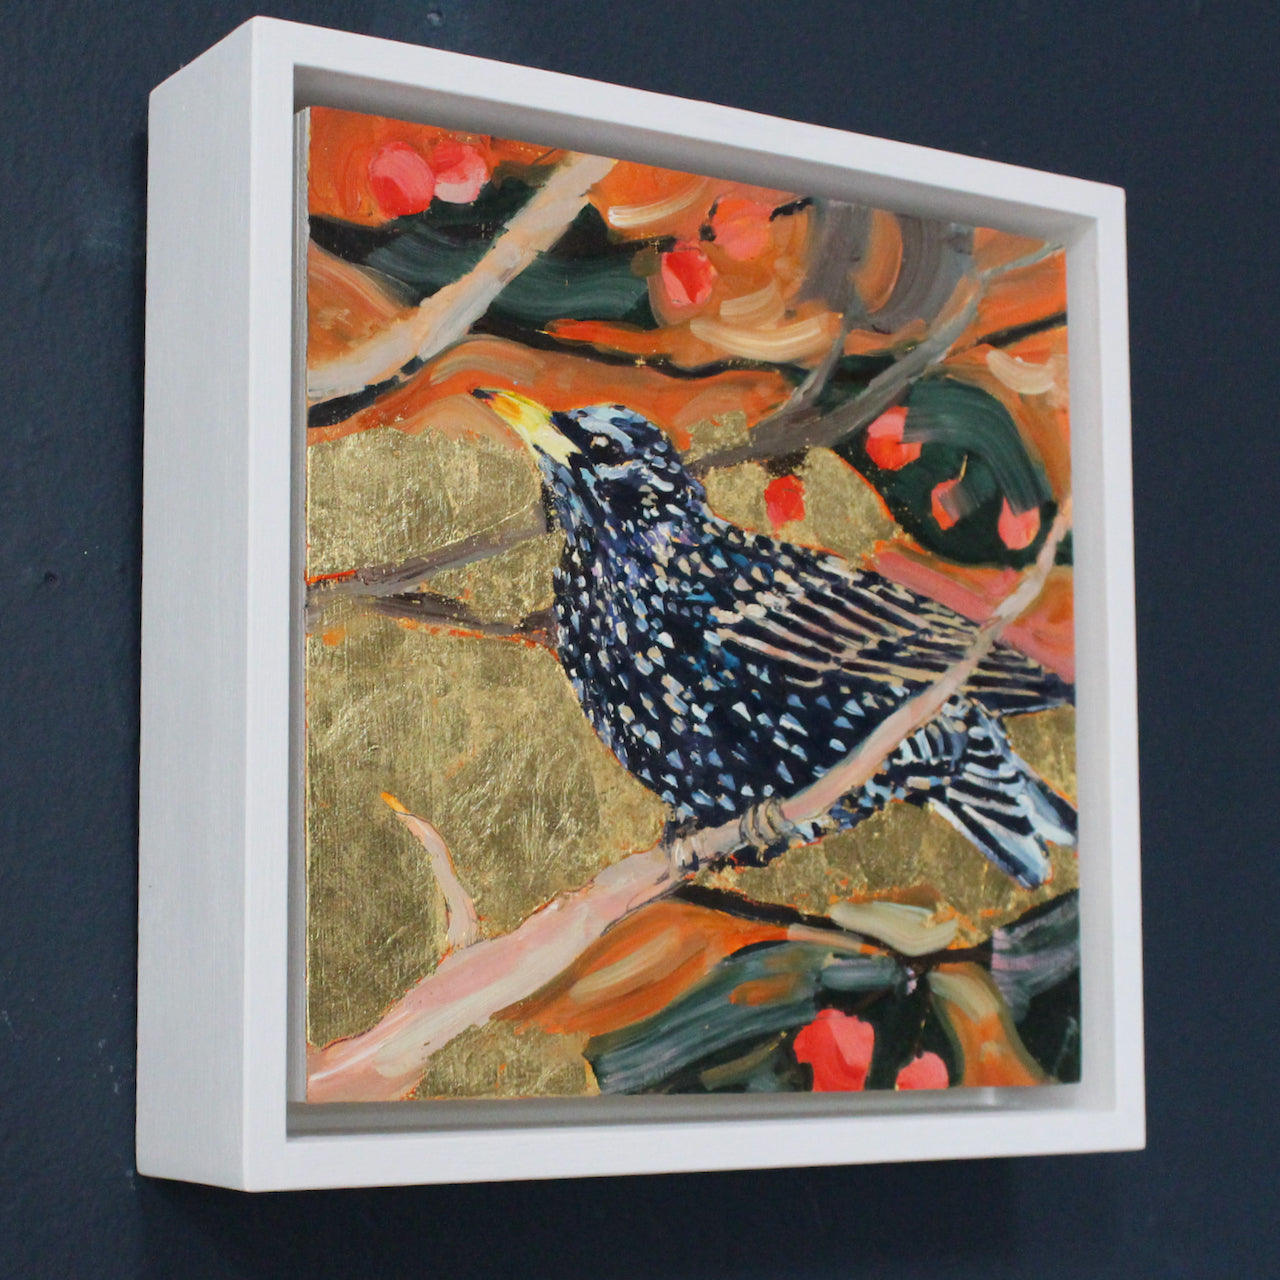 a Jill Hudson painting of a starling on a branch with and orange and gold background.